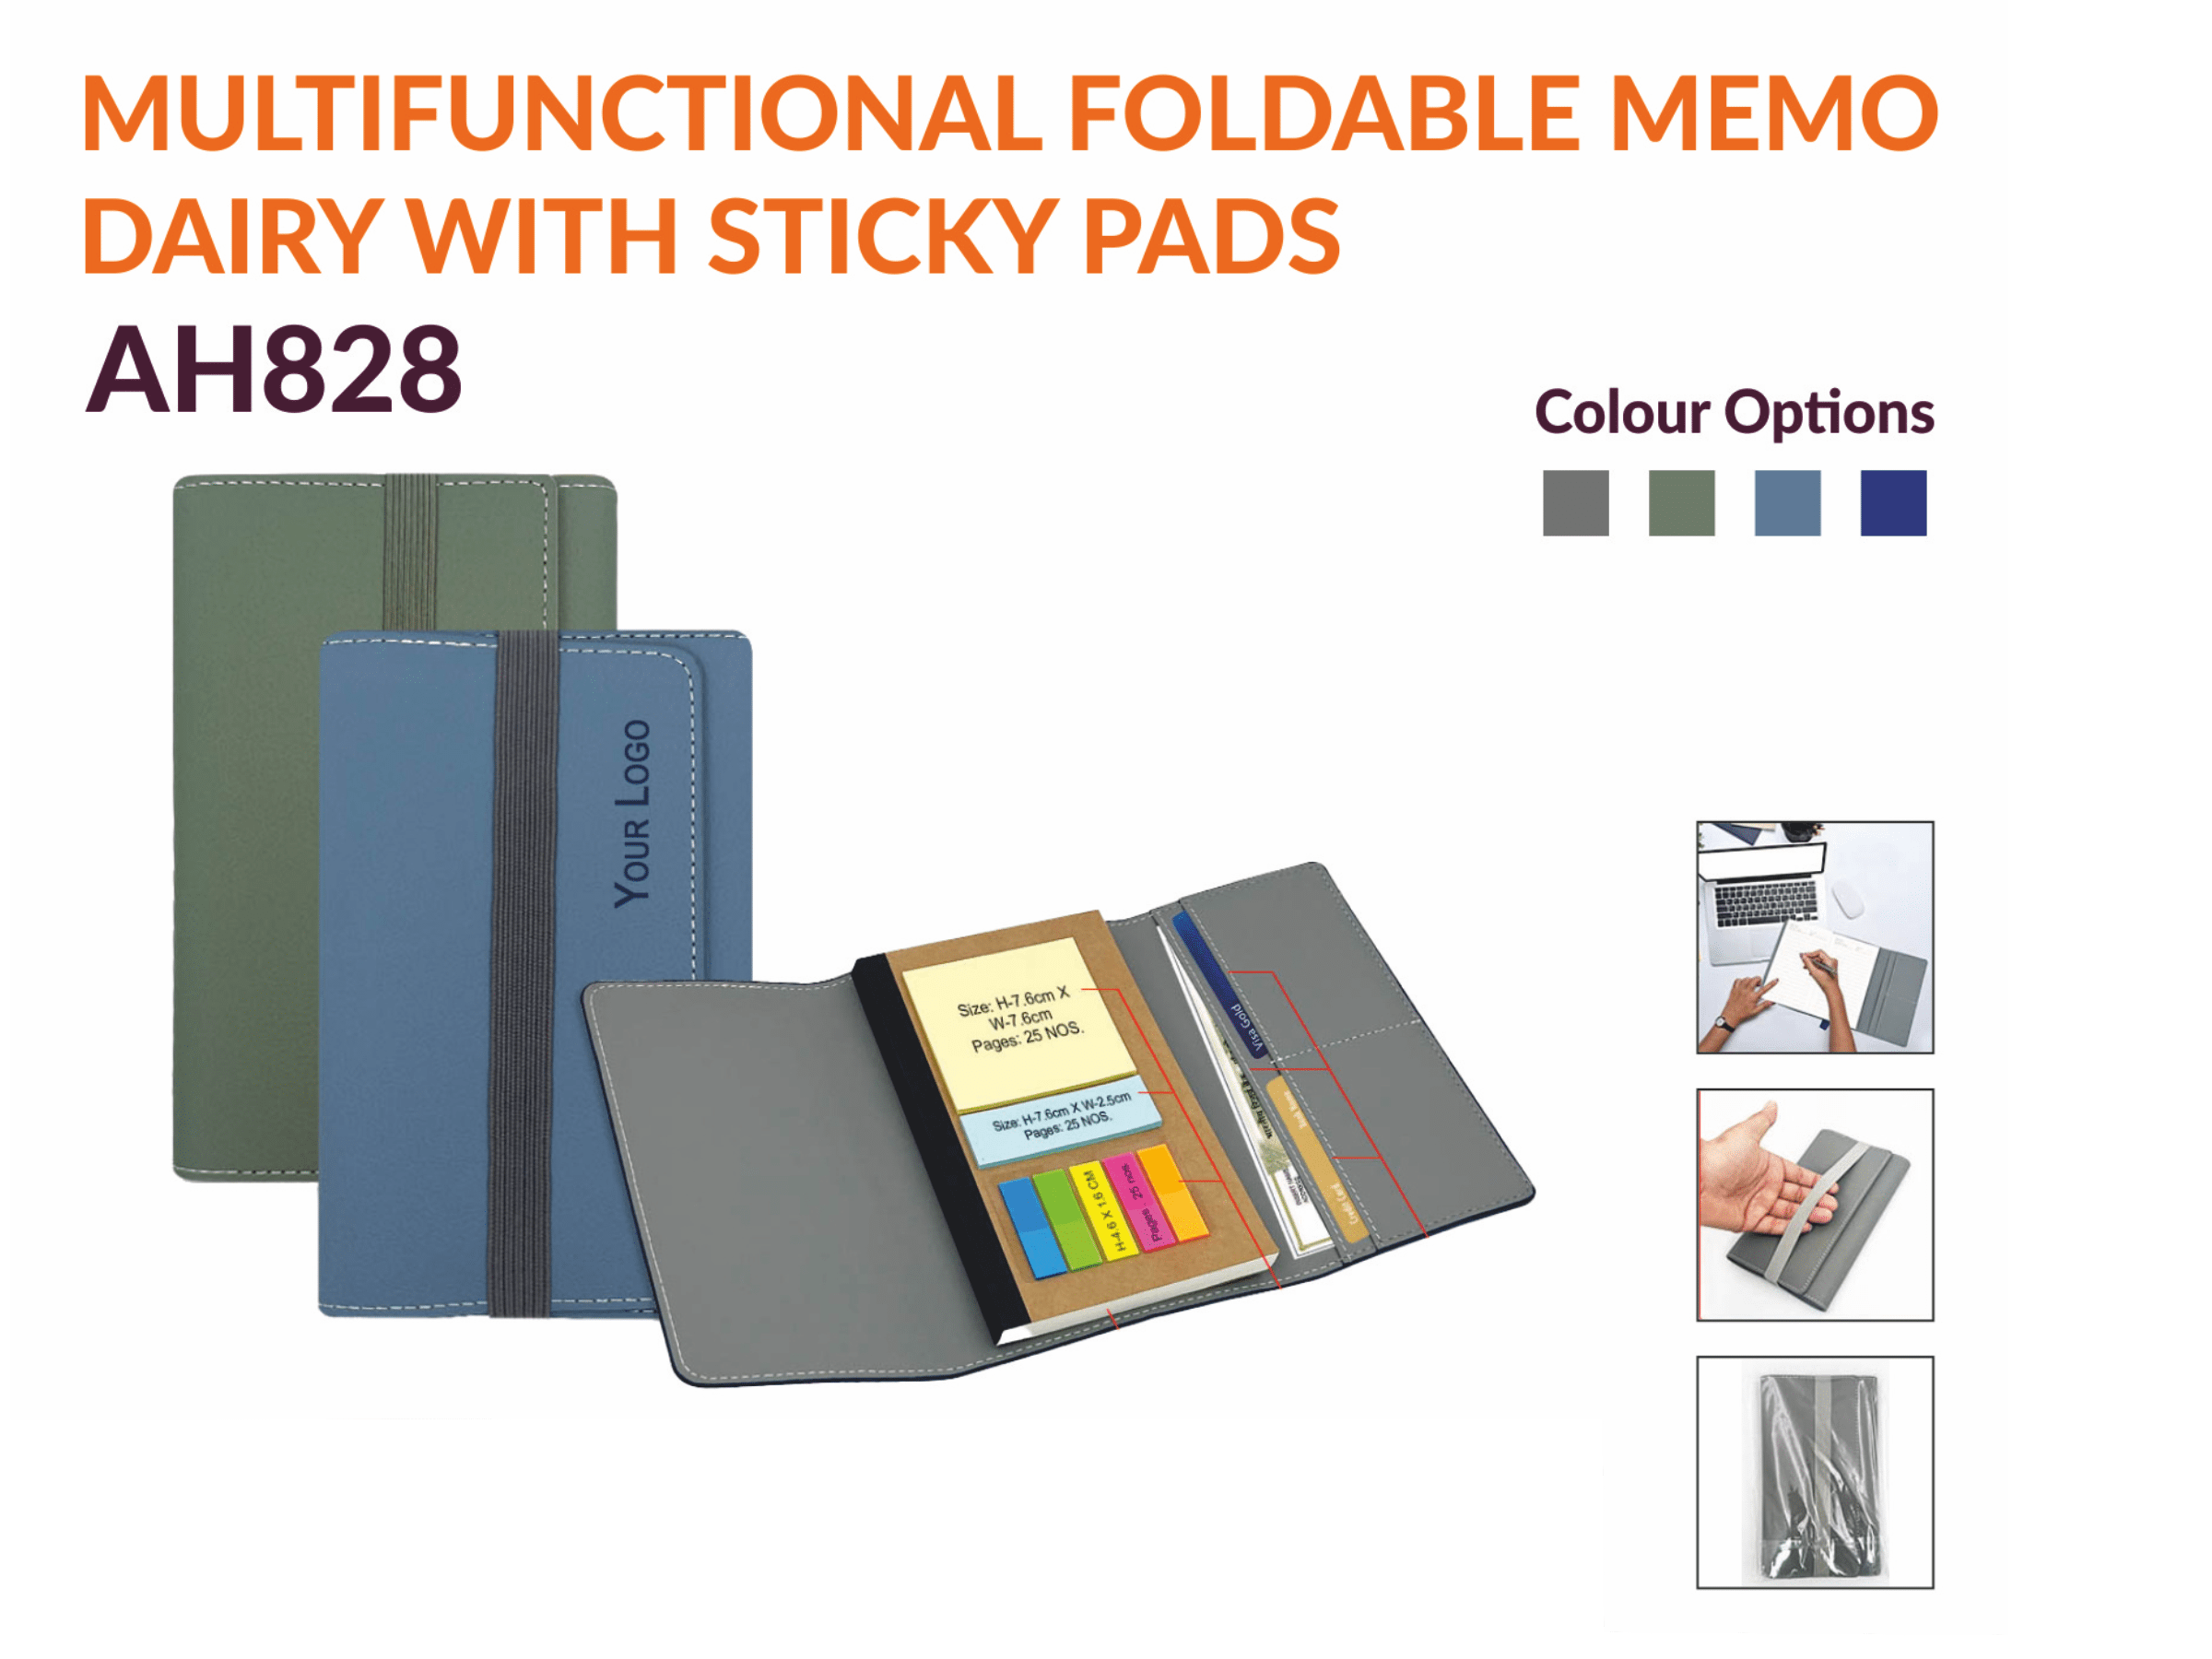 MULTIFUNCTIONAL FOLDABLE MEMO DAIRY WITH STICKY PADS